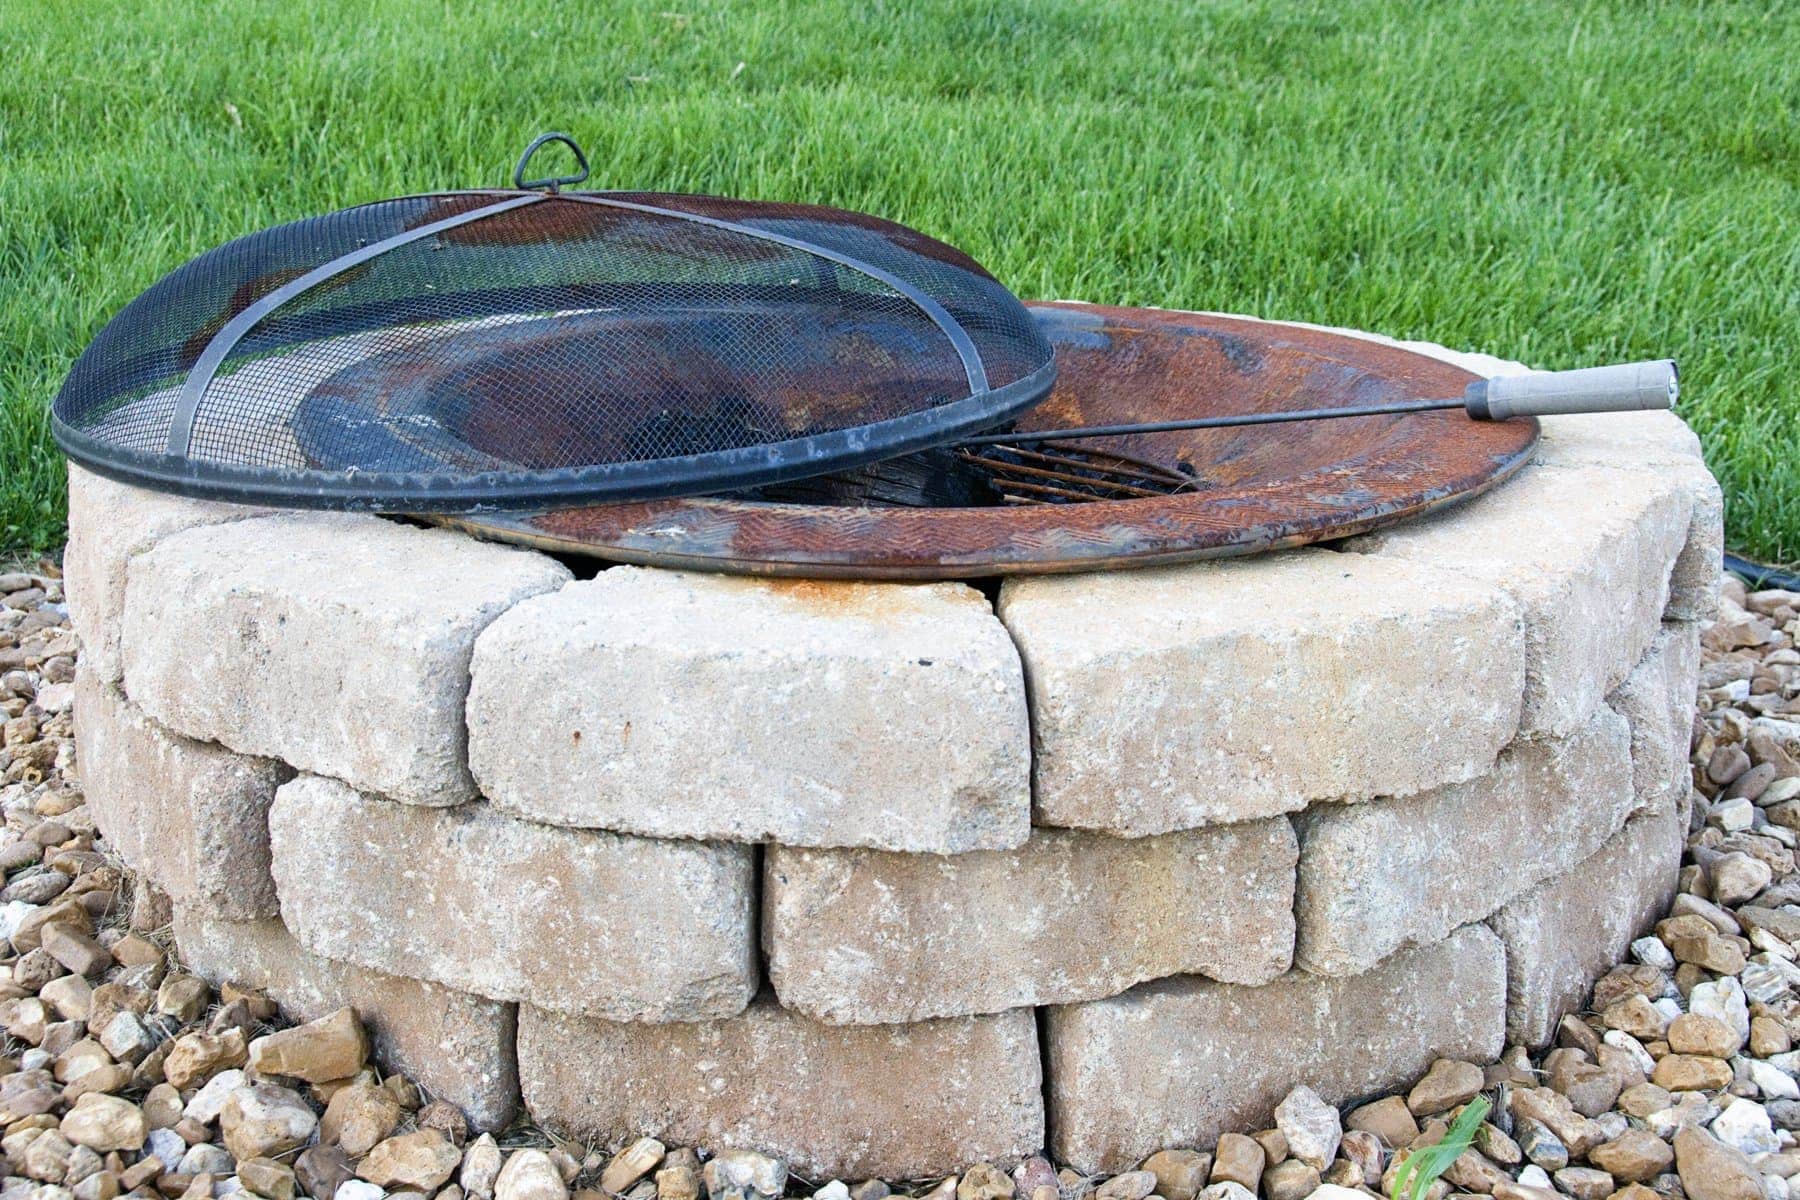 How to build an Outdoor Fire Pit